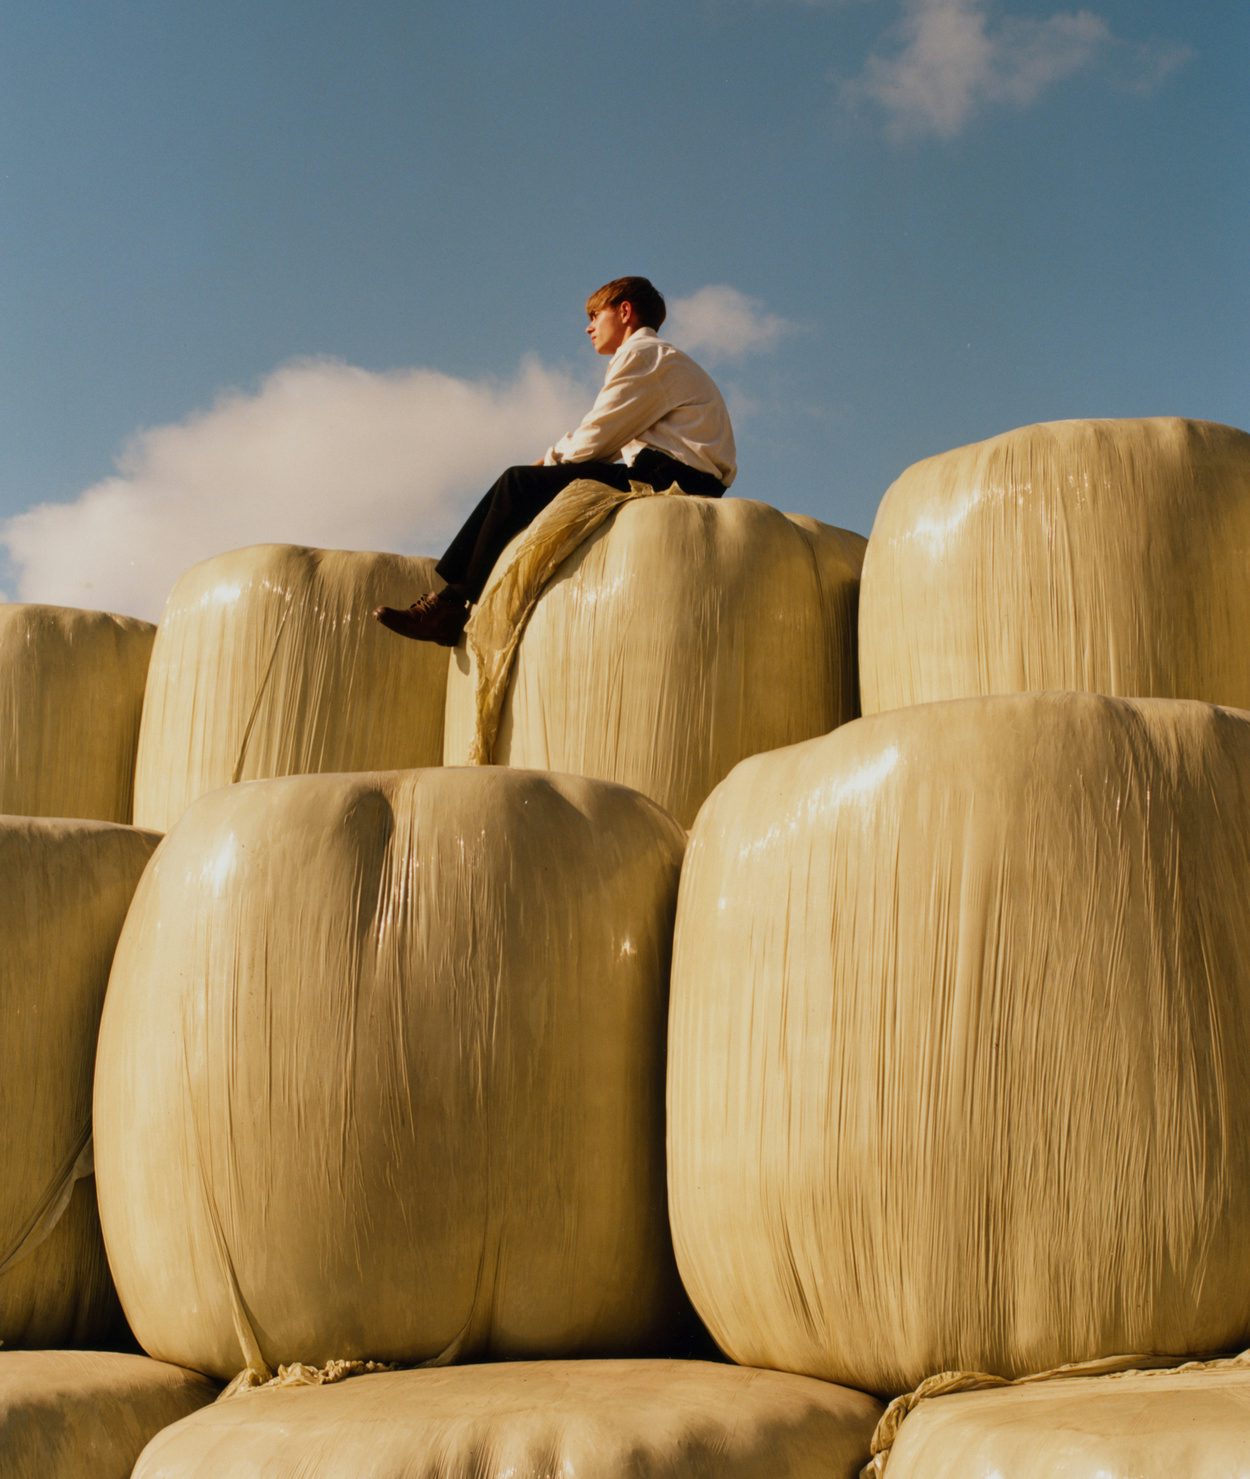 Photograph by Niall Hodson of a person sat on top of stacks of hay bales